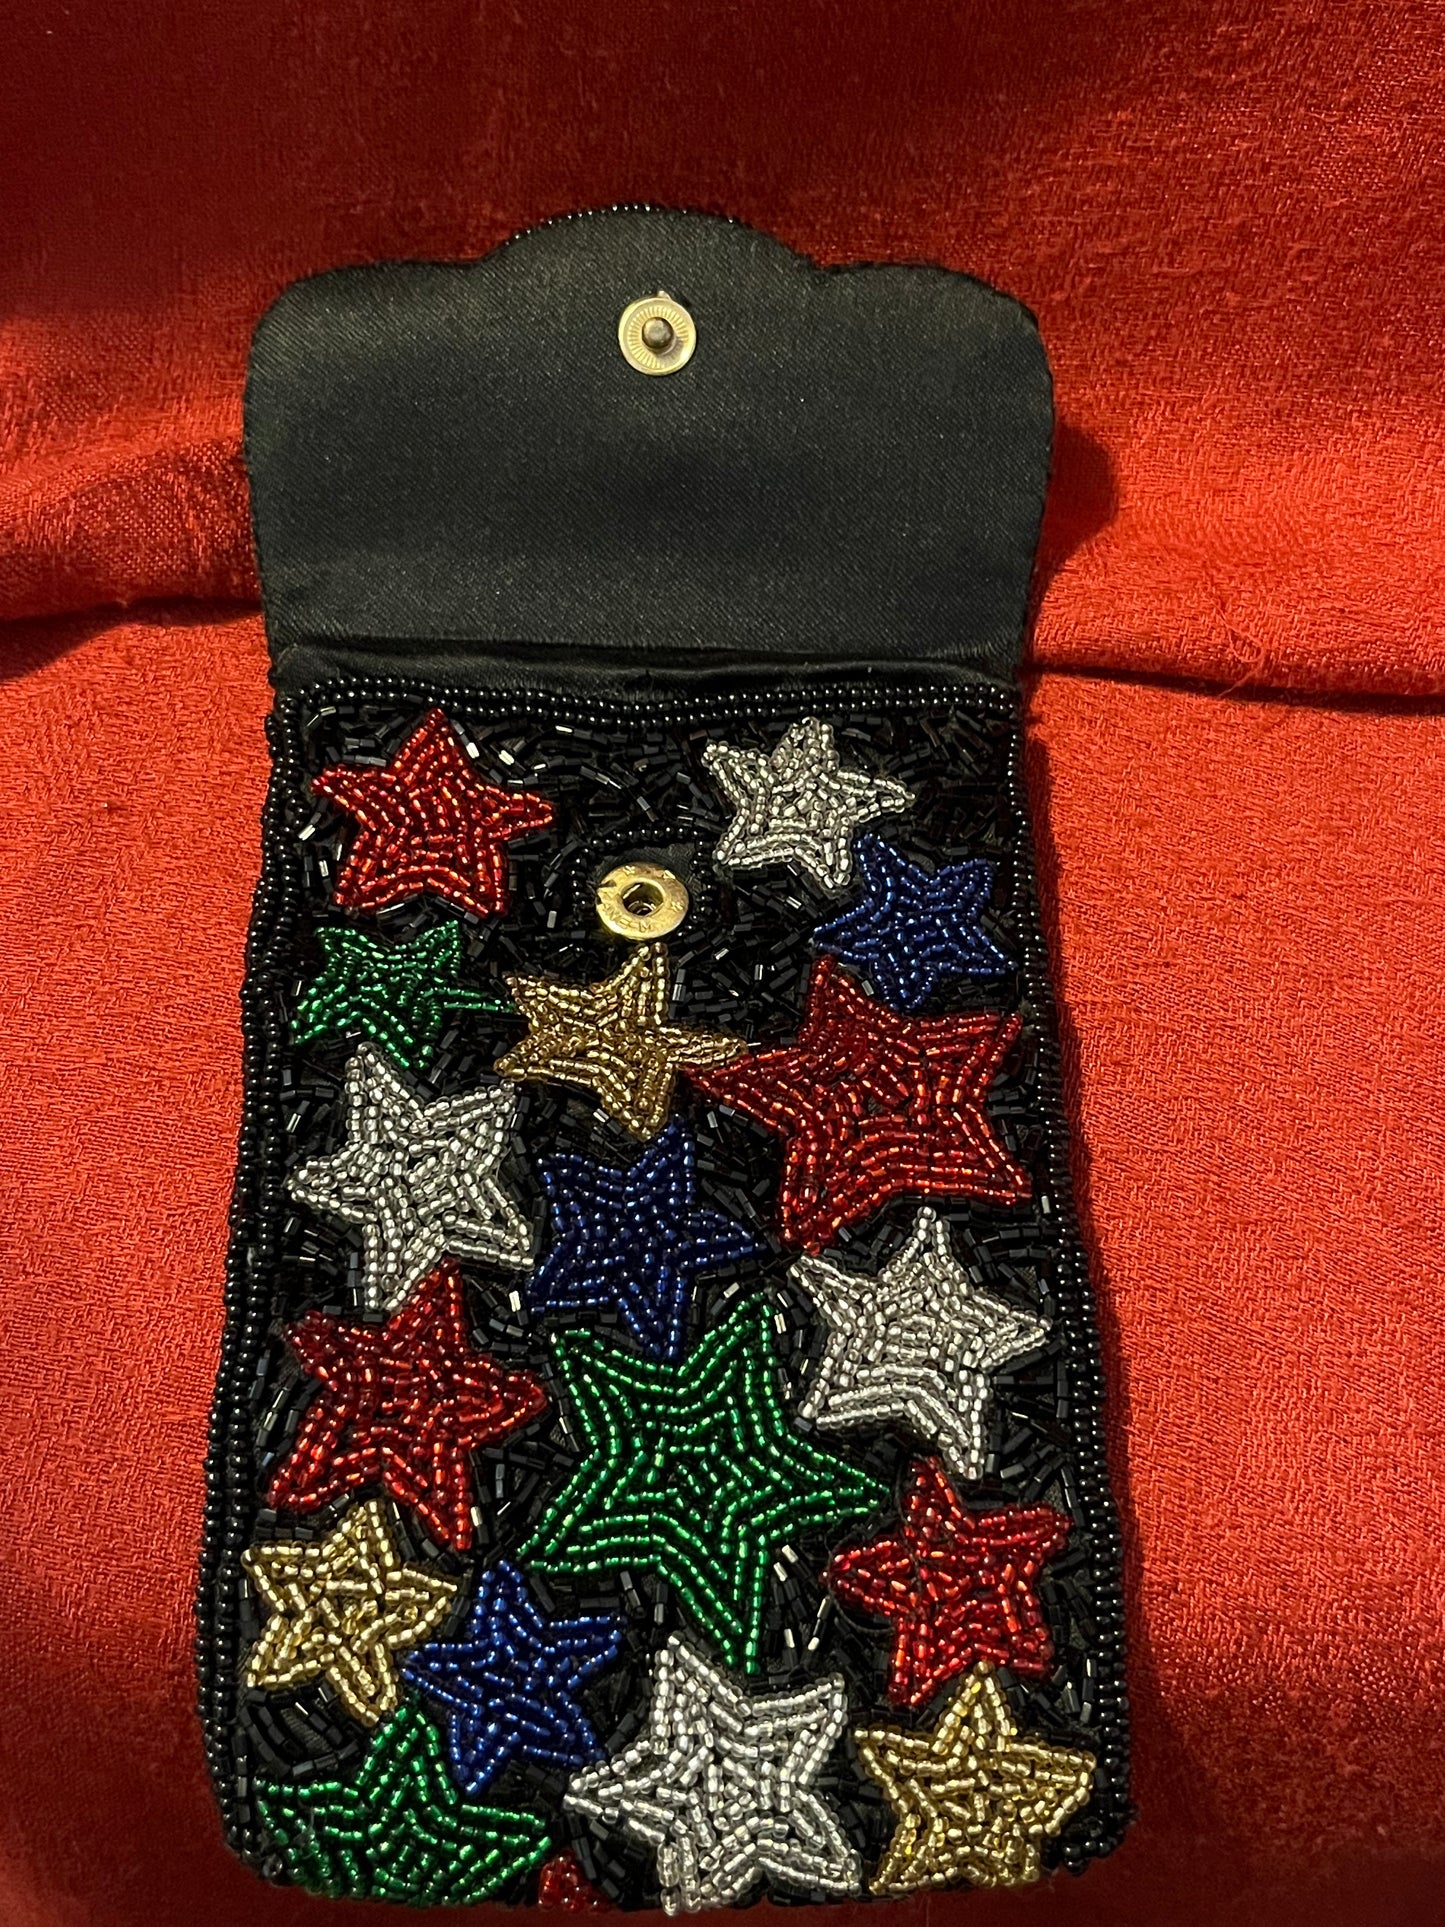 Vintage Neiman Marcus Beaded Evening Bag with Star Pattern